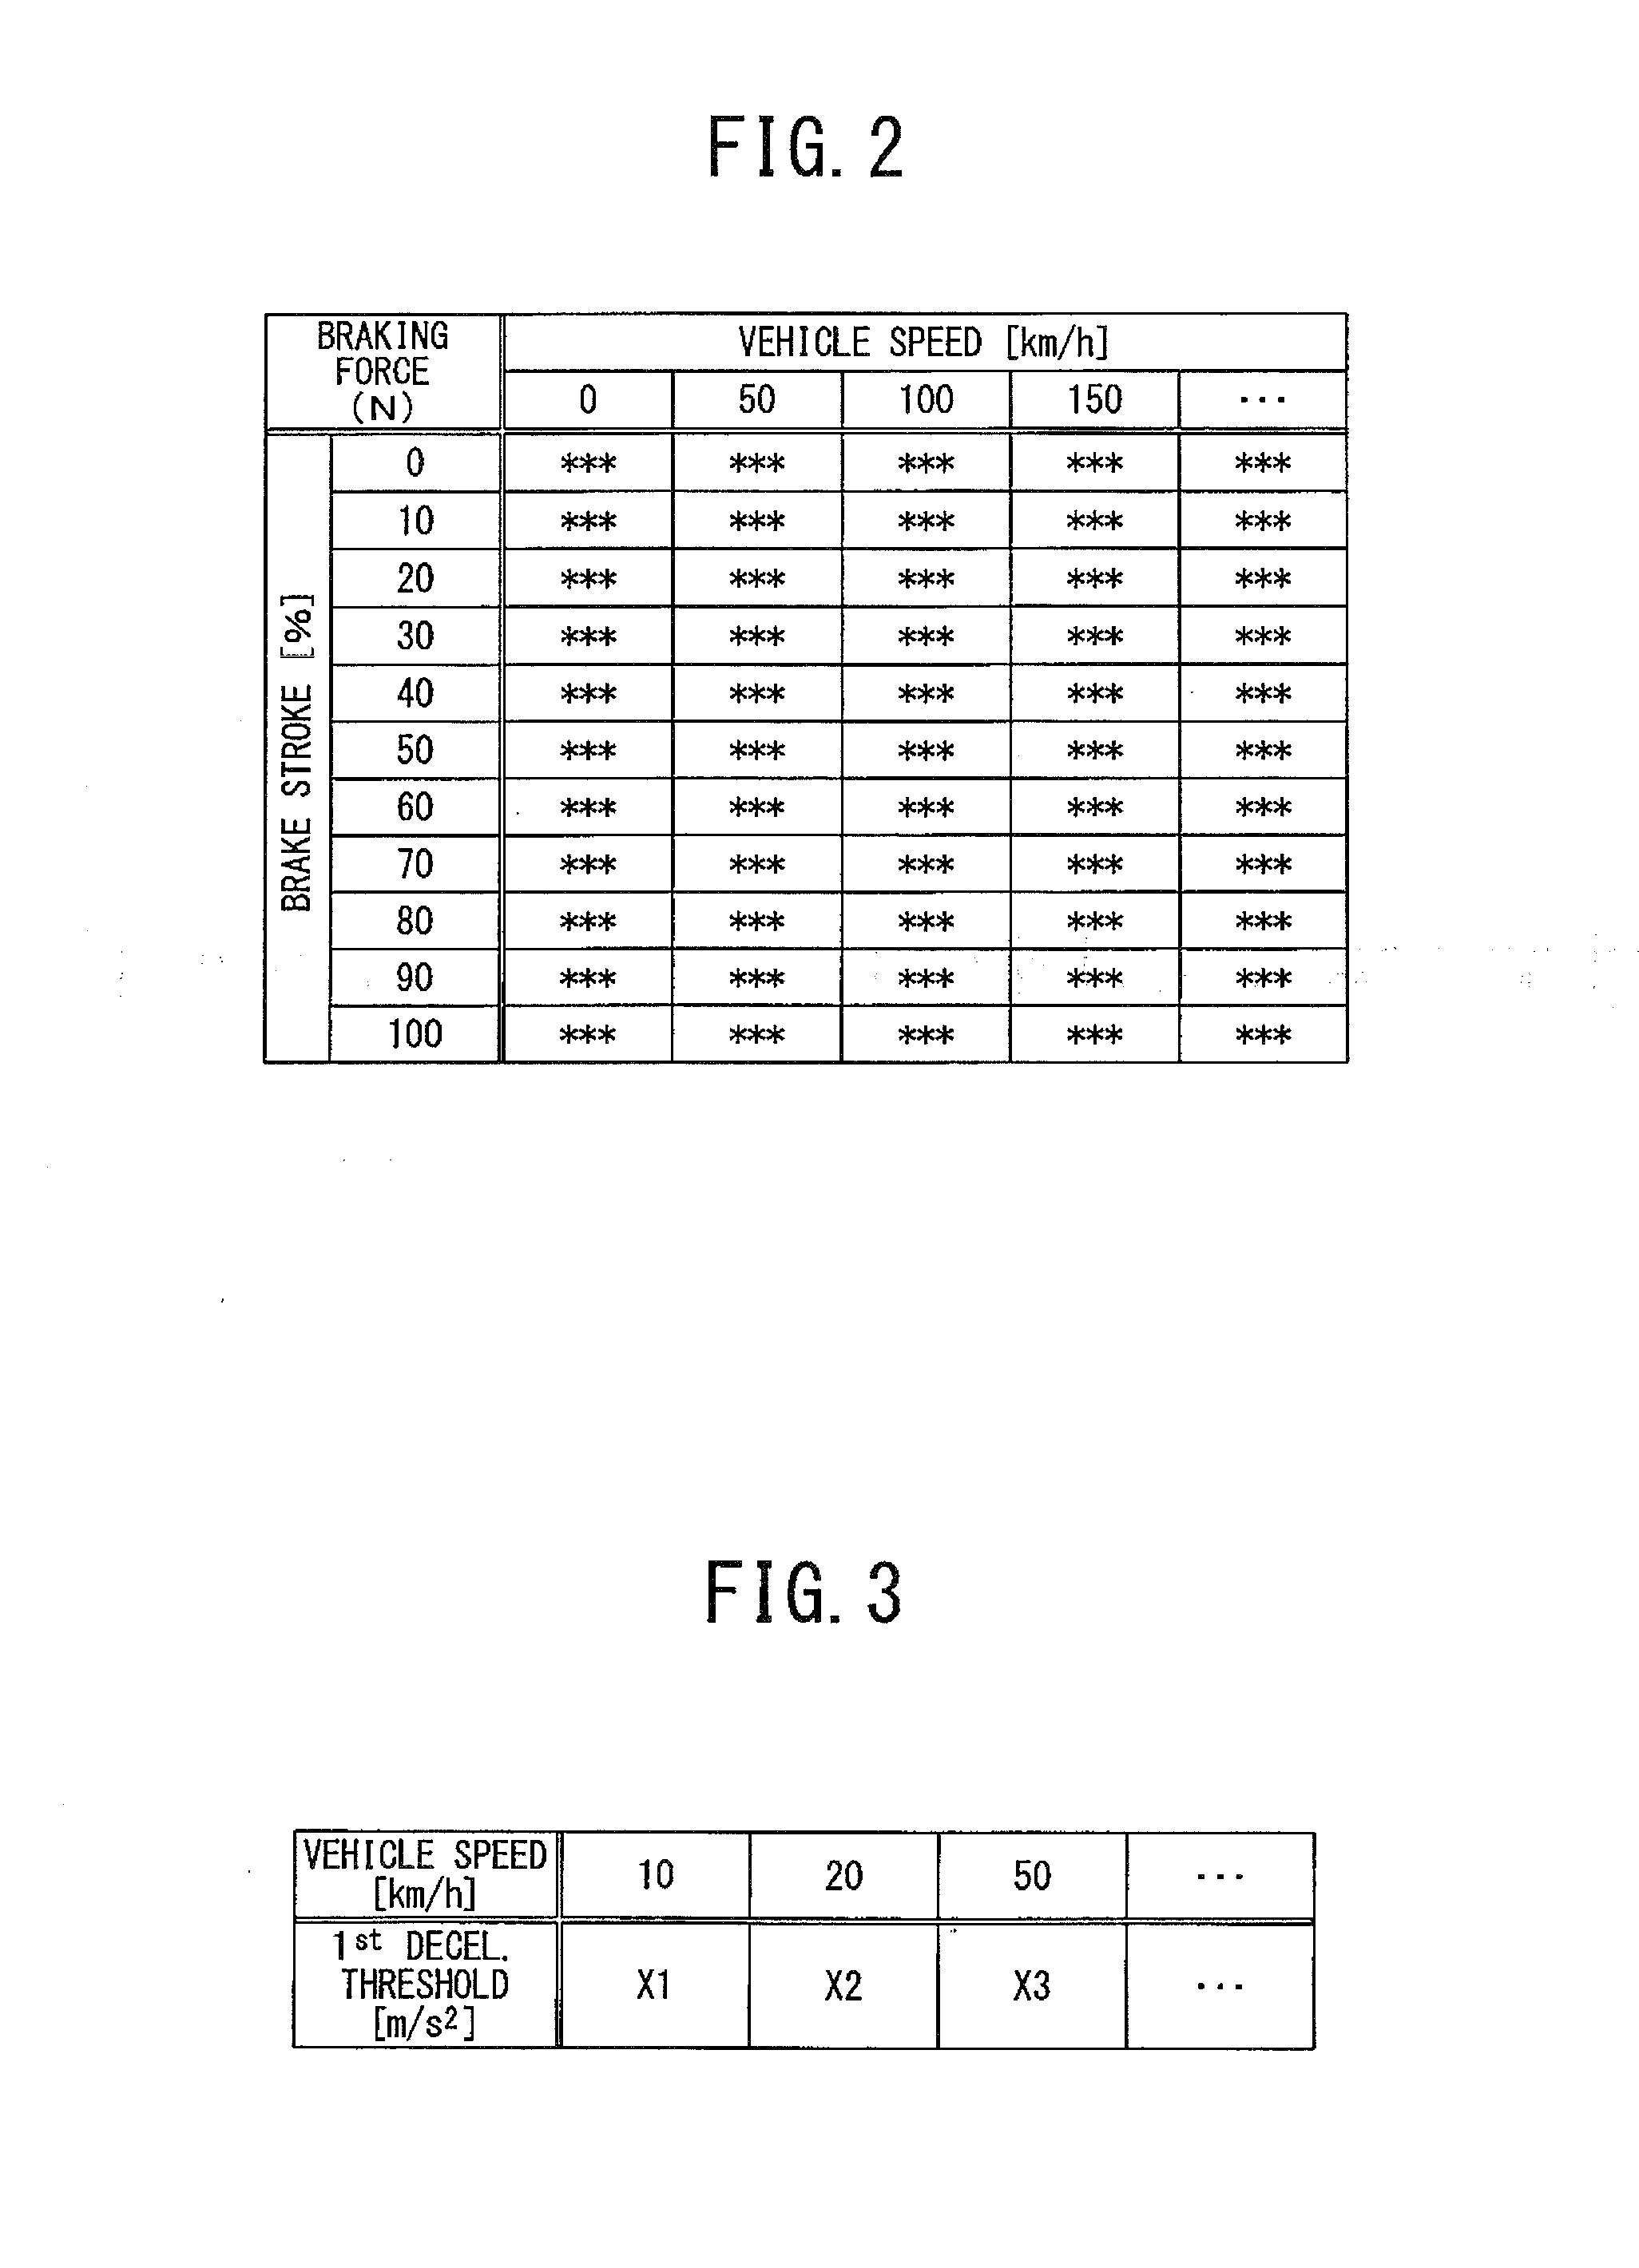 Gear shift control system for automatic transmission